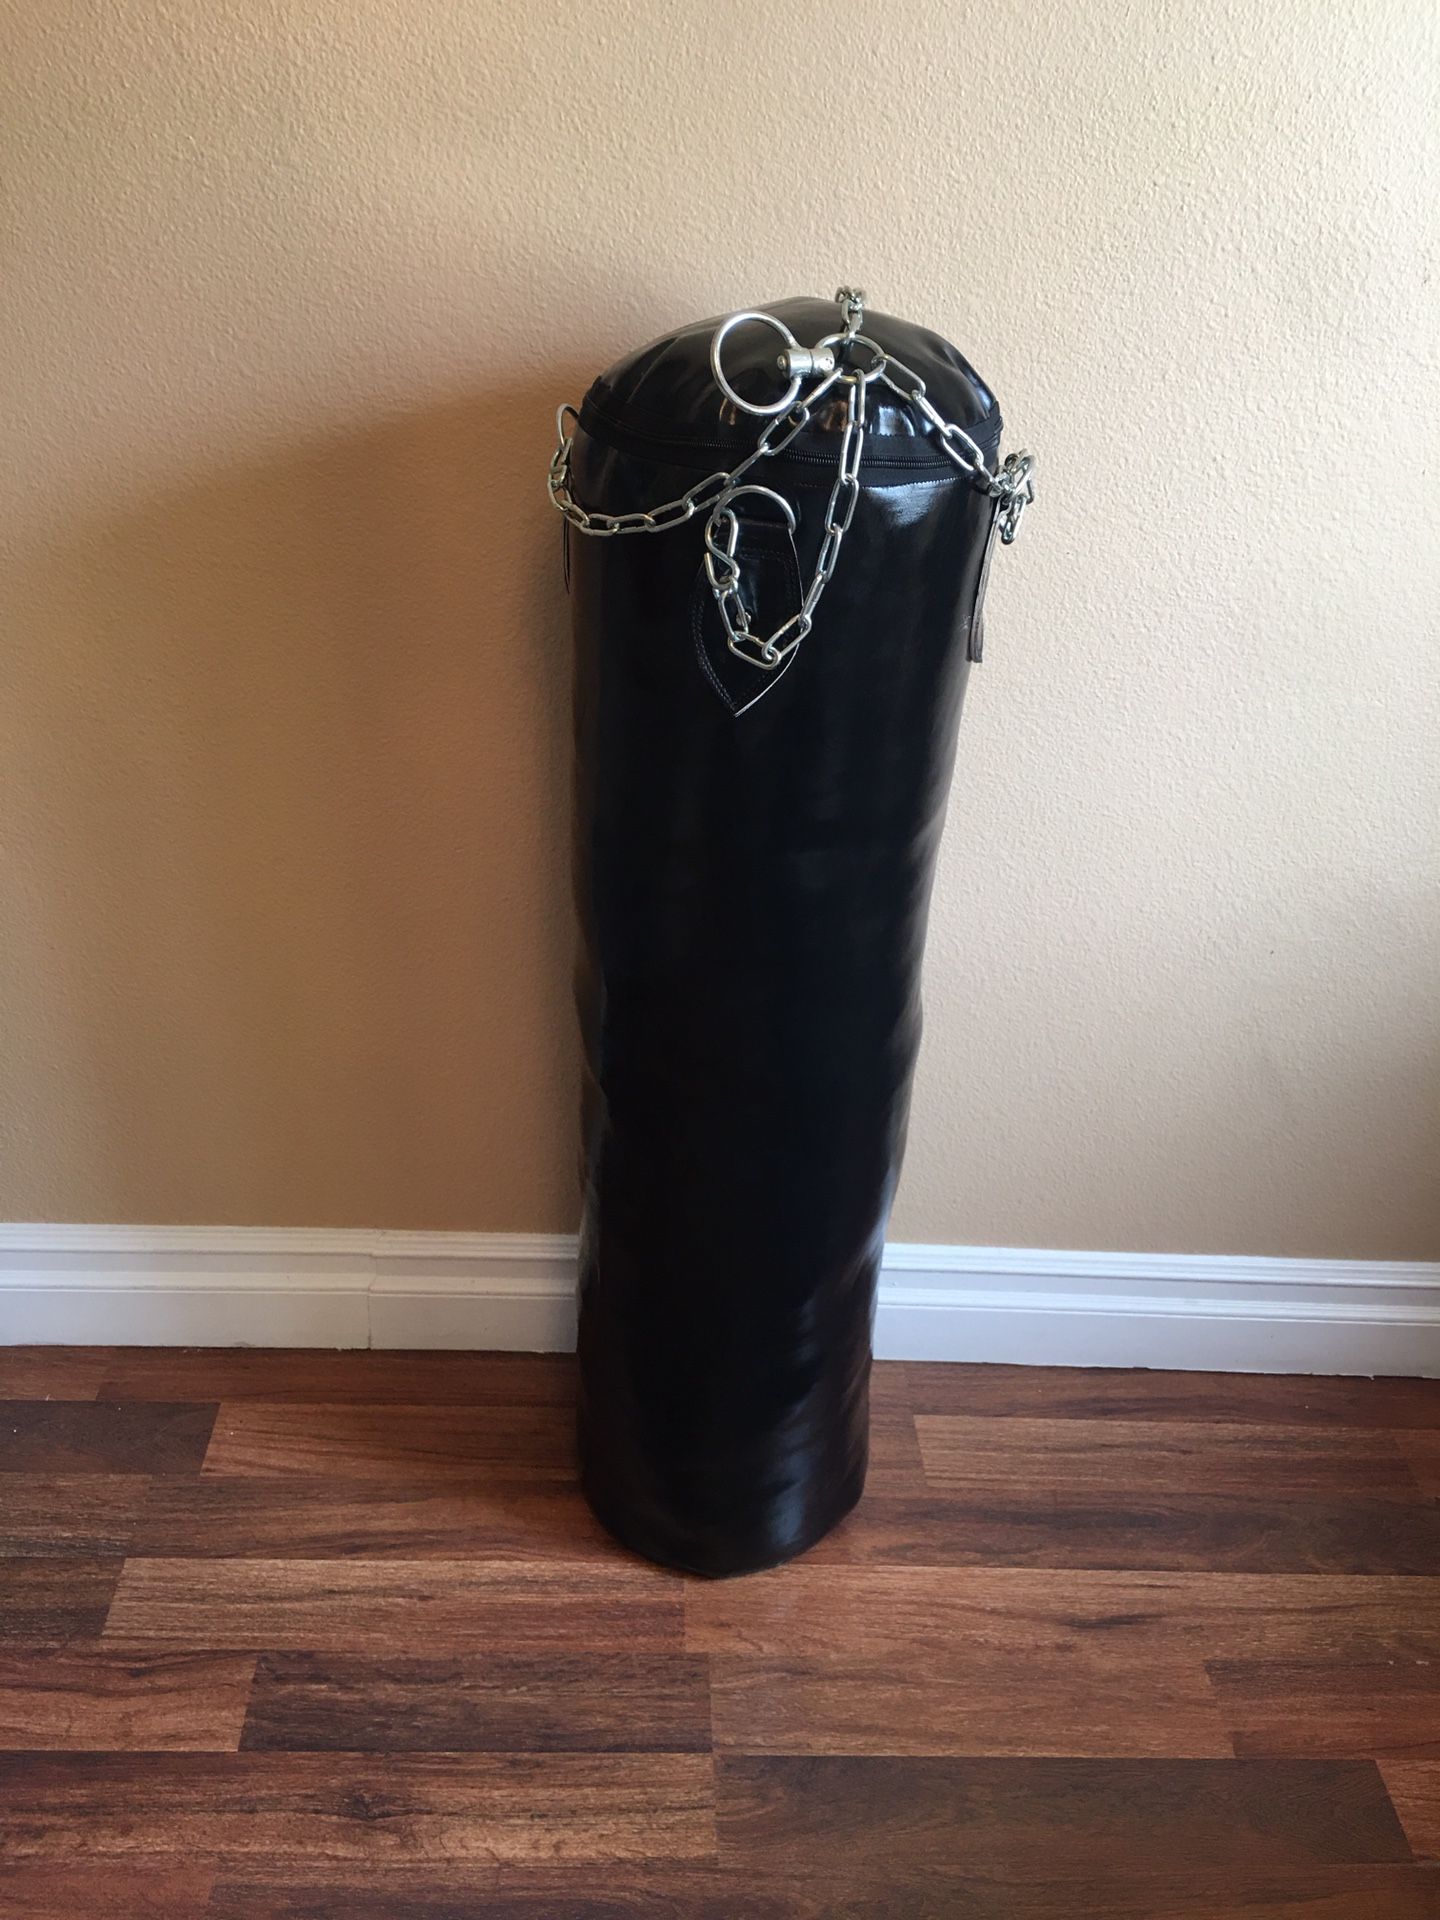 PUNCHING BAG BRAND NEW 60 POUNDS FILLED LUXURY WITH CHAIN PERFECT WORKOUT 